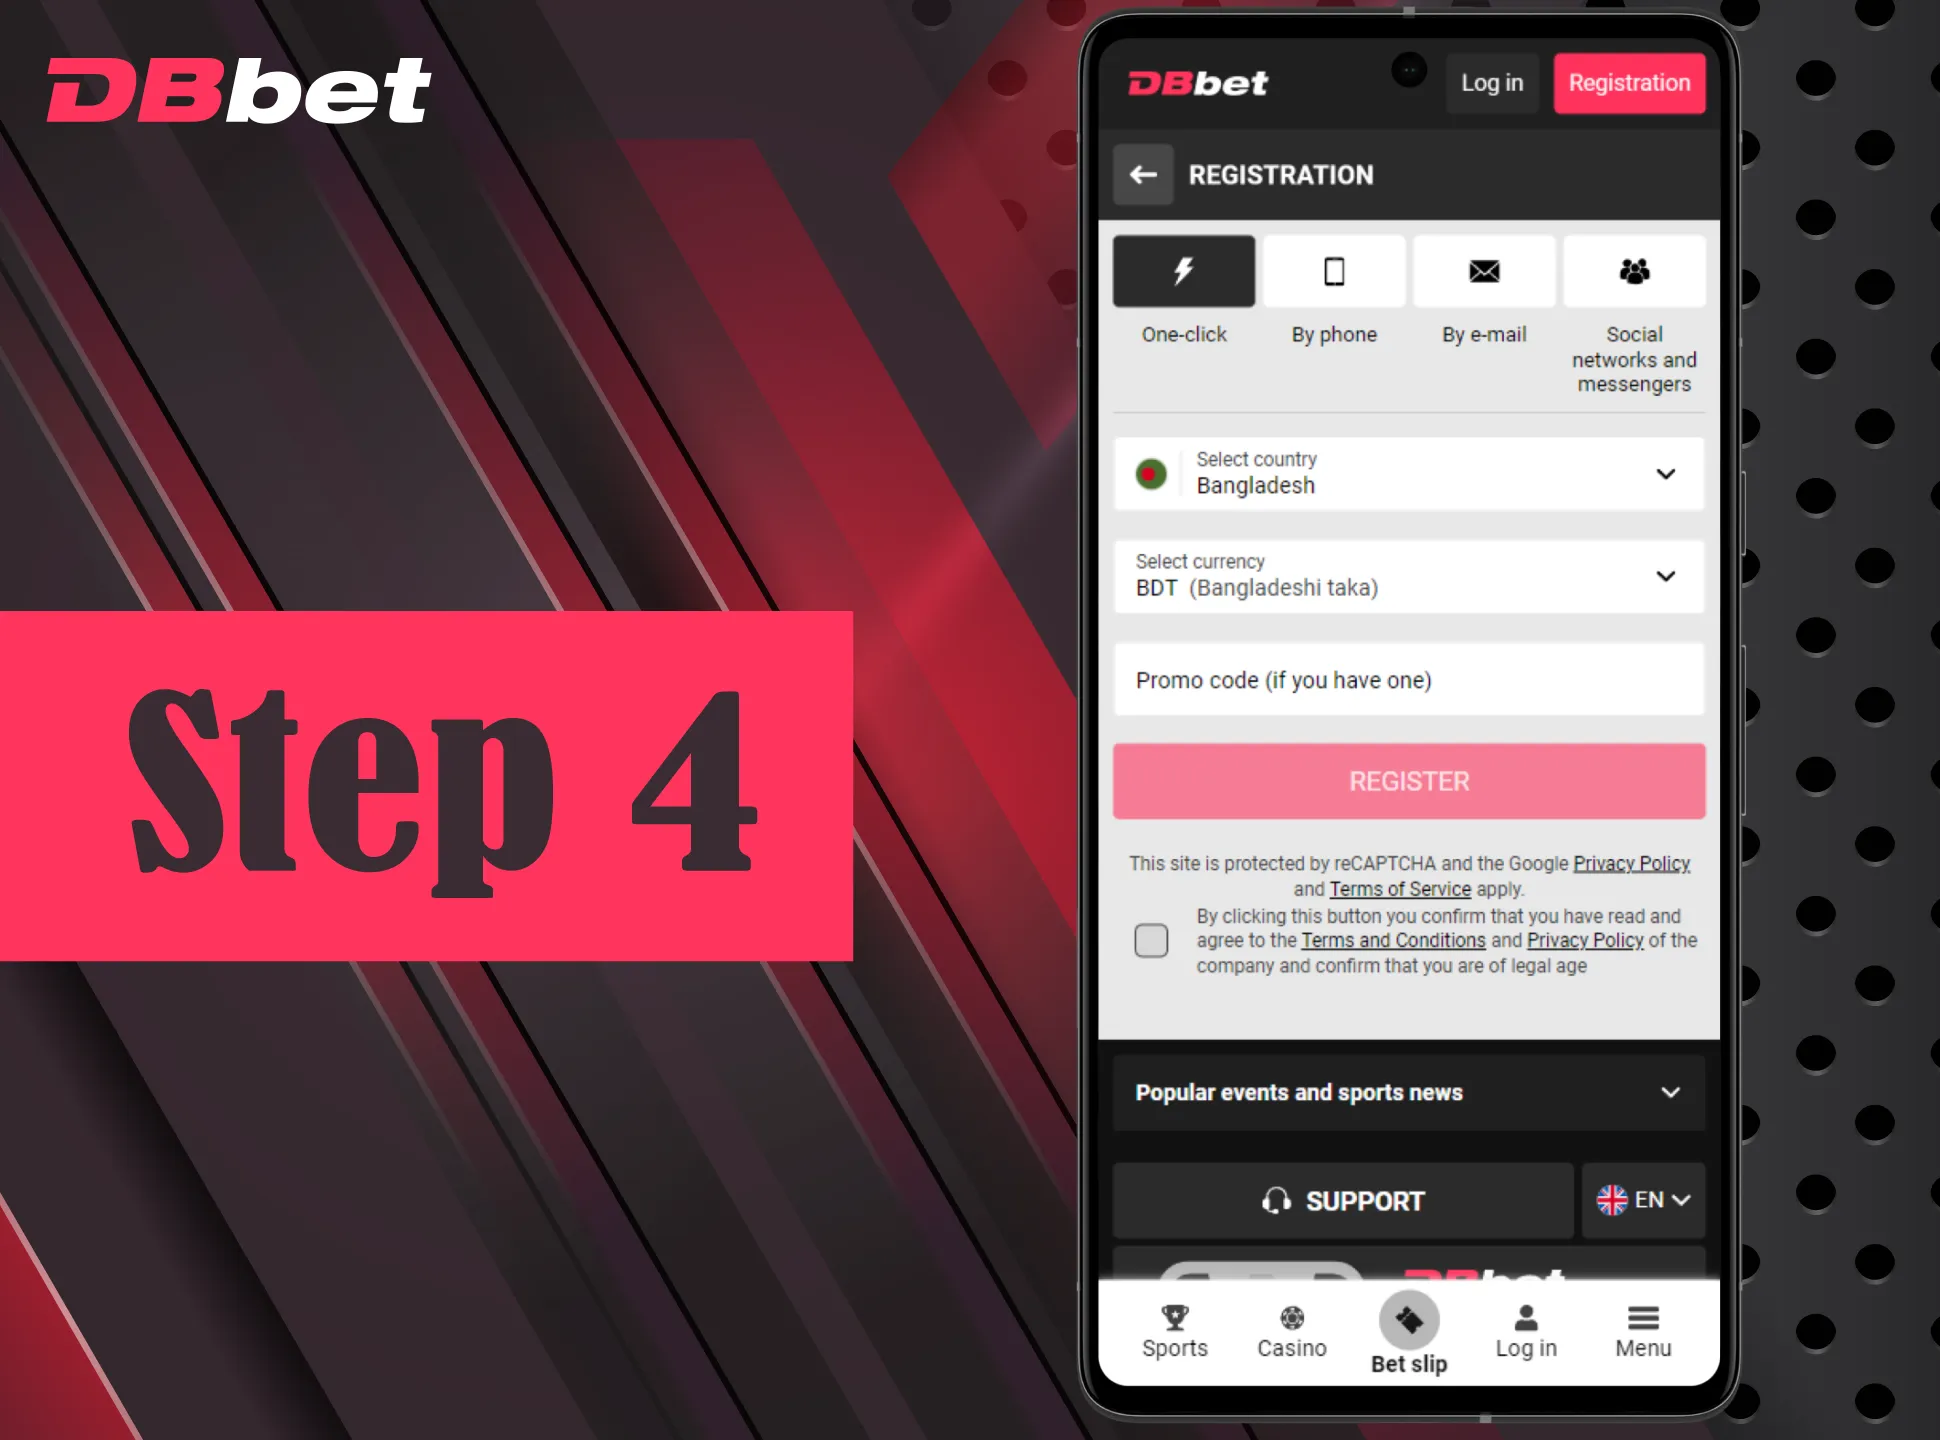 Make new DBbet account after installation.